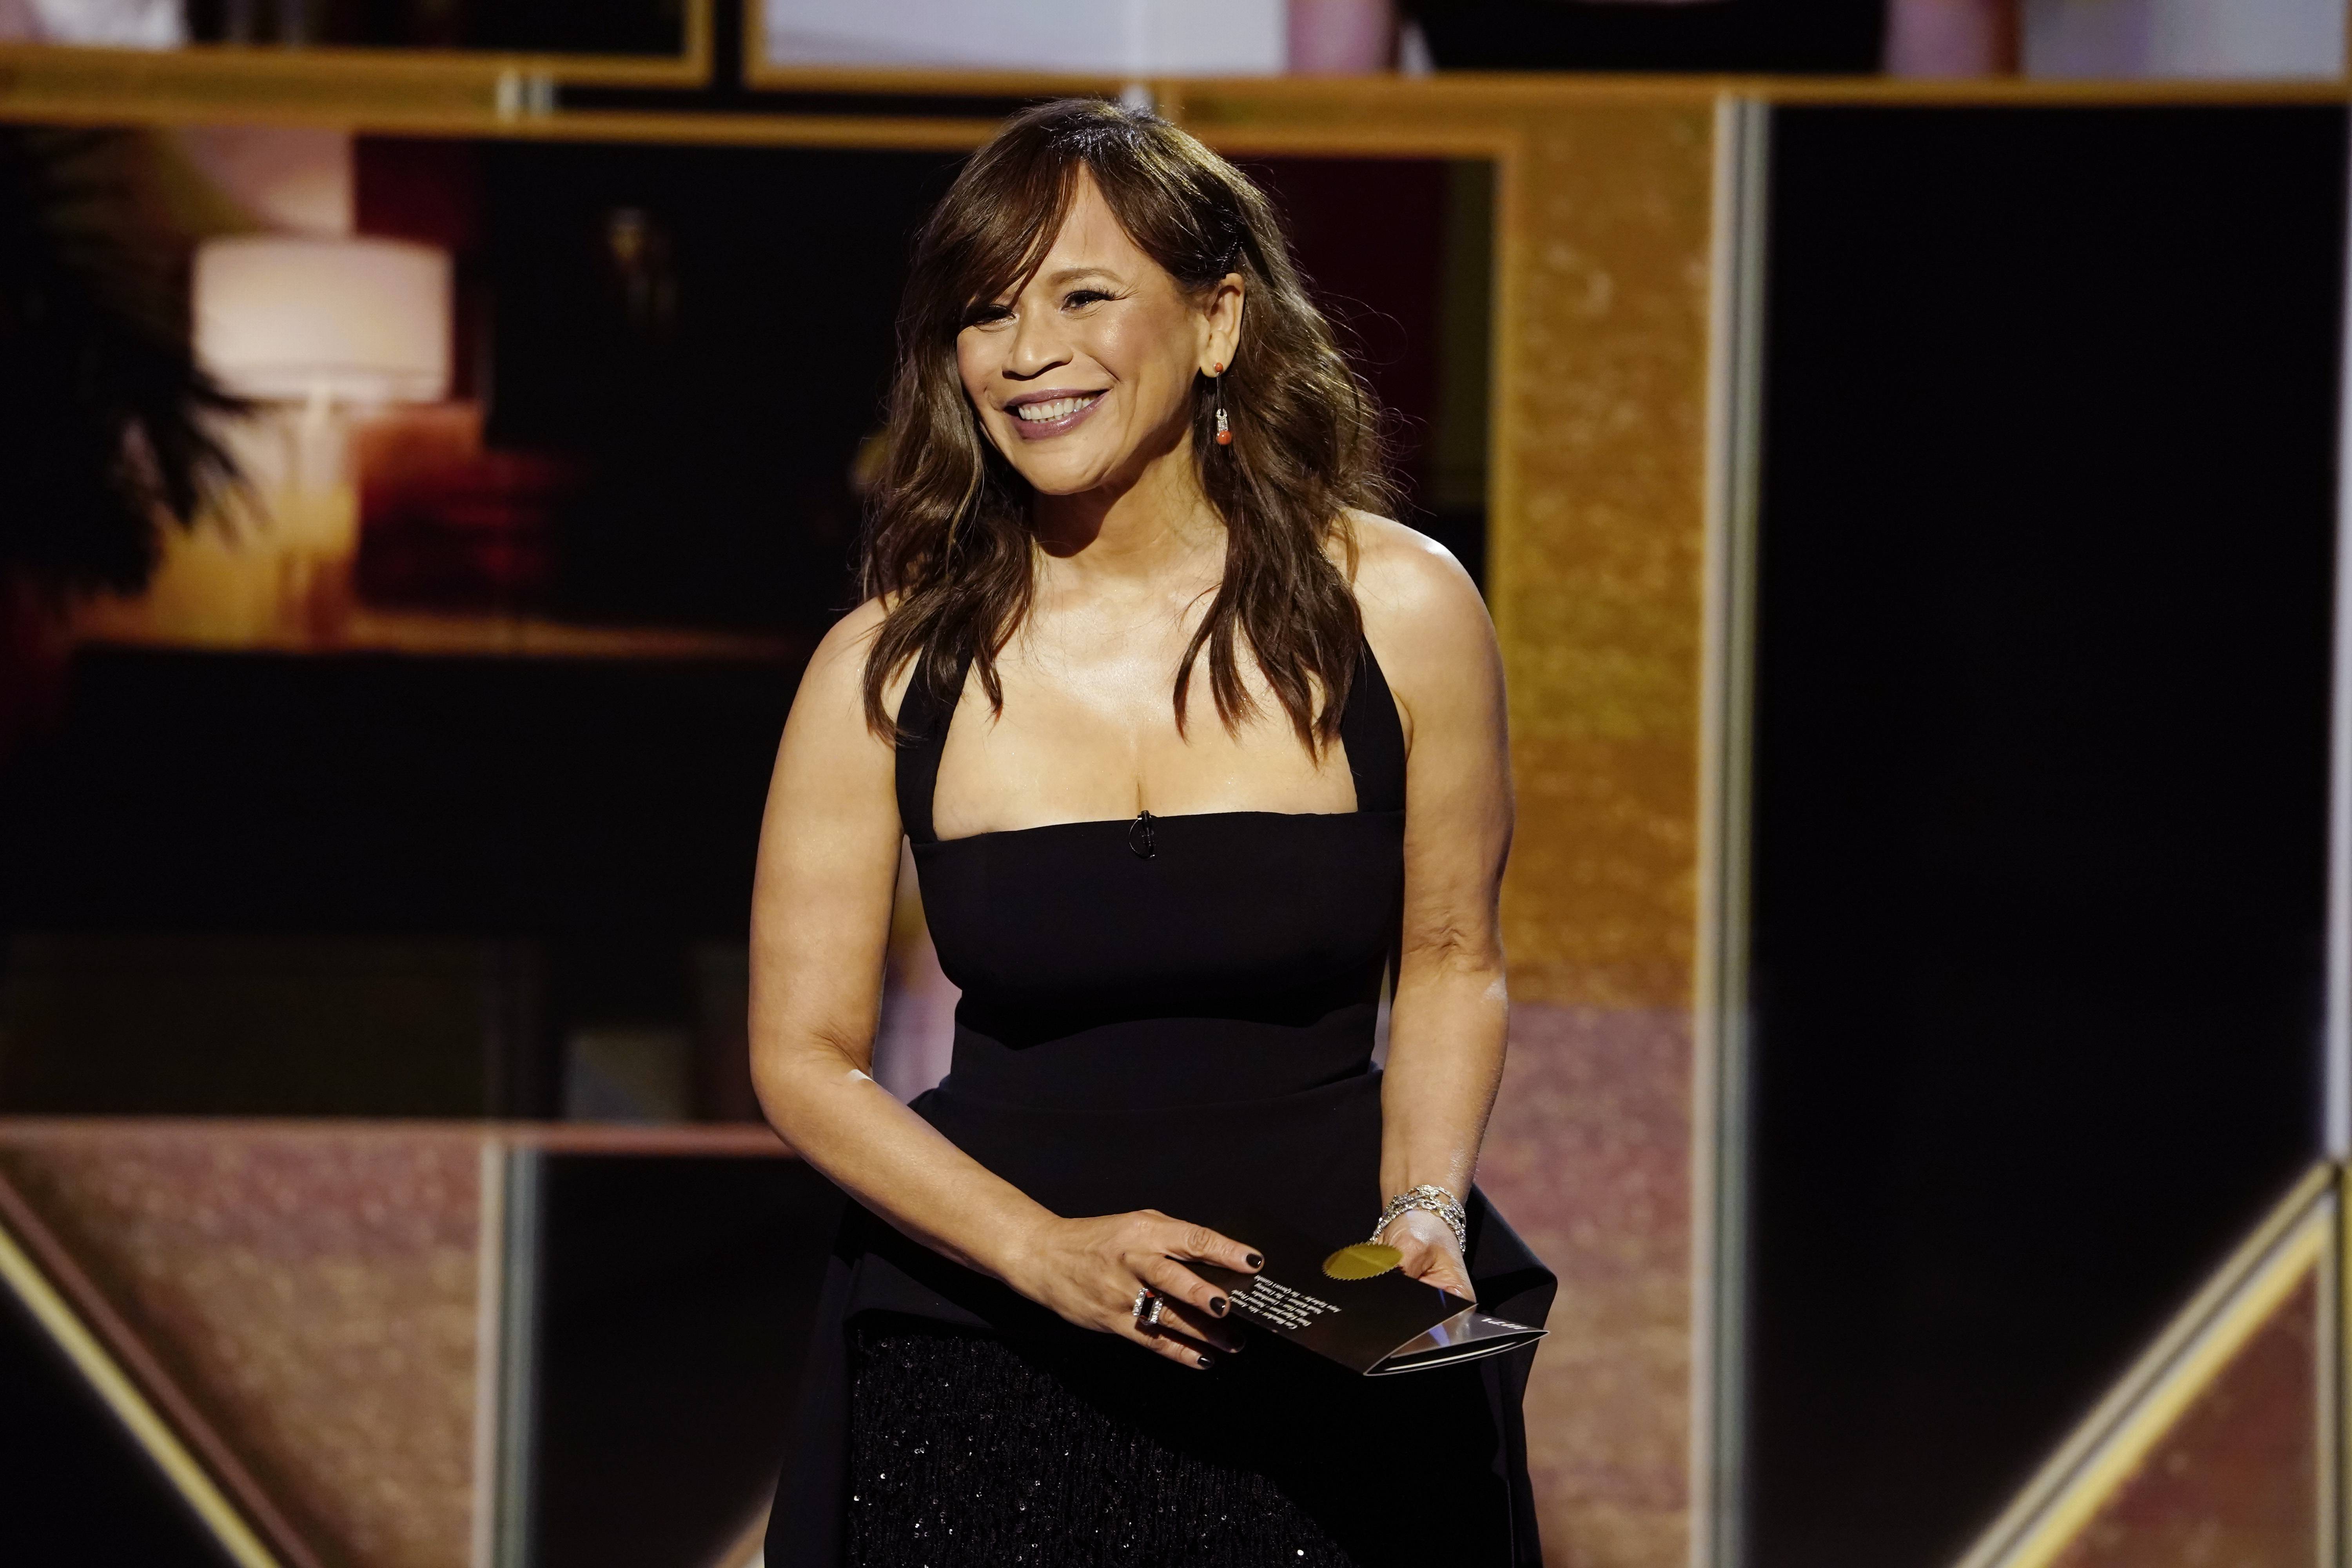 NEW YORK, NEW YORK: 78th Annual GOLDEN GLOBE AWARDS -- Pictured: Rosie Perez speaks onstage at the 78th Annual Golden Globe Awards held at The Rainbow Room and broadcast on February 28, 2021 in New York, New York. -- (Photo by Peter Kramer/NBC/NBCU Photo Bank via Getty Images)